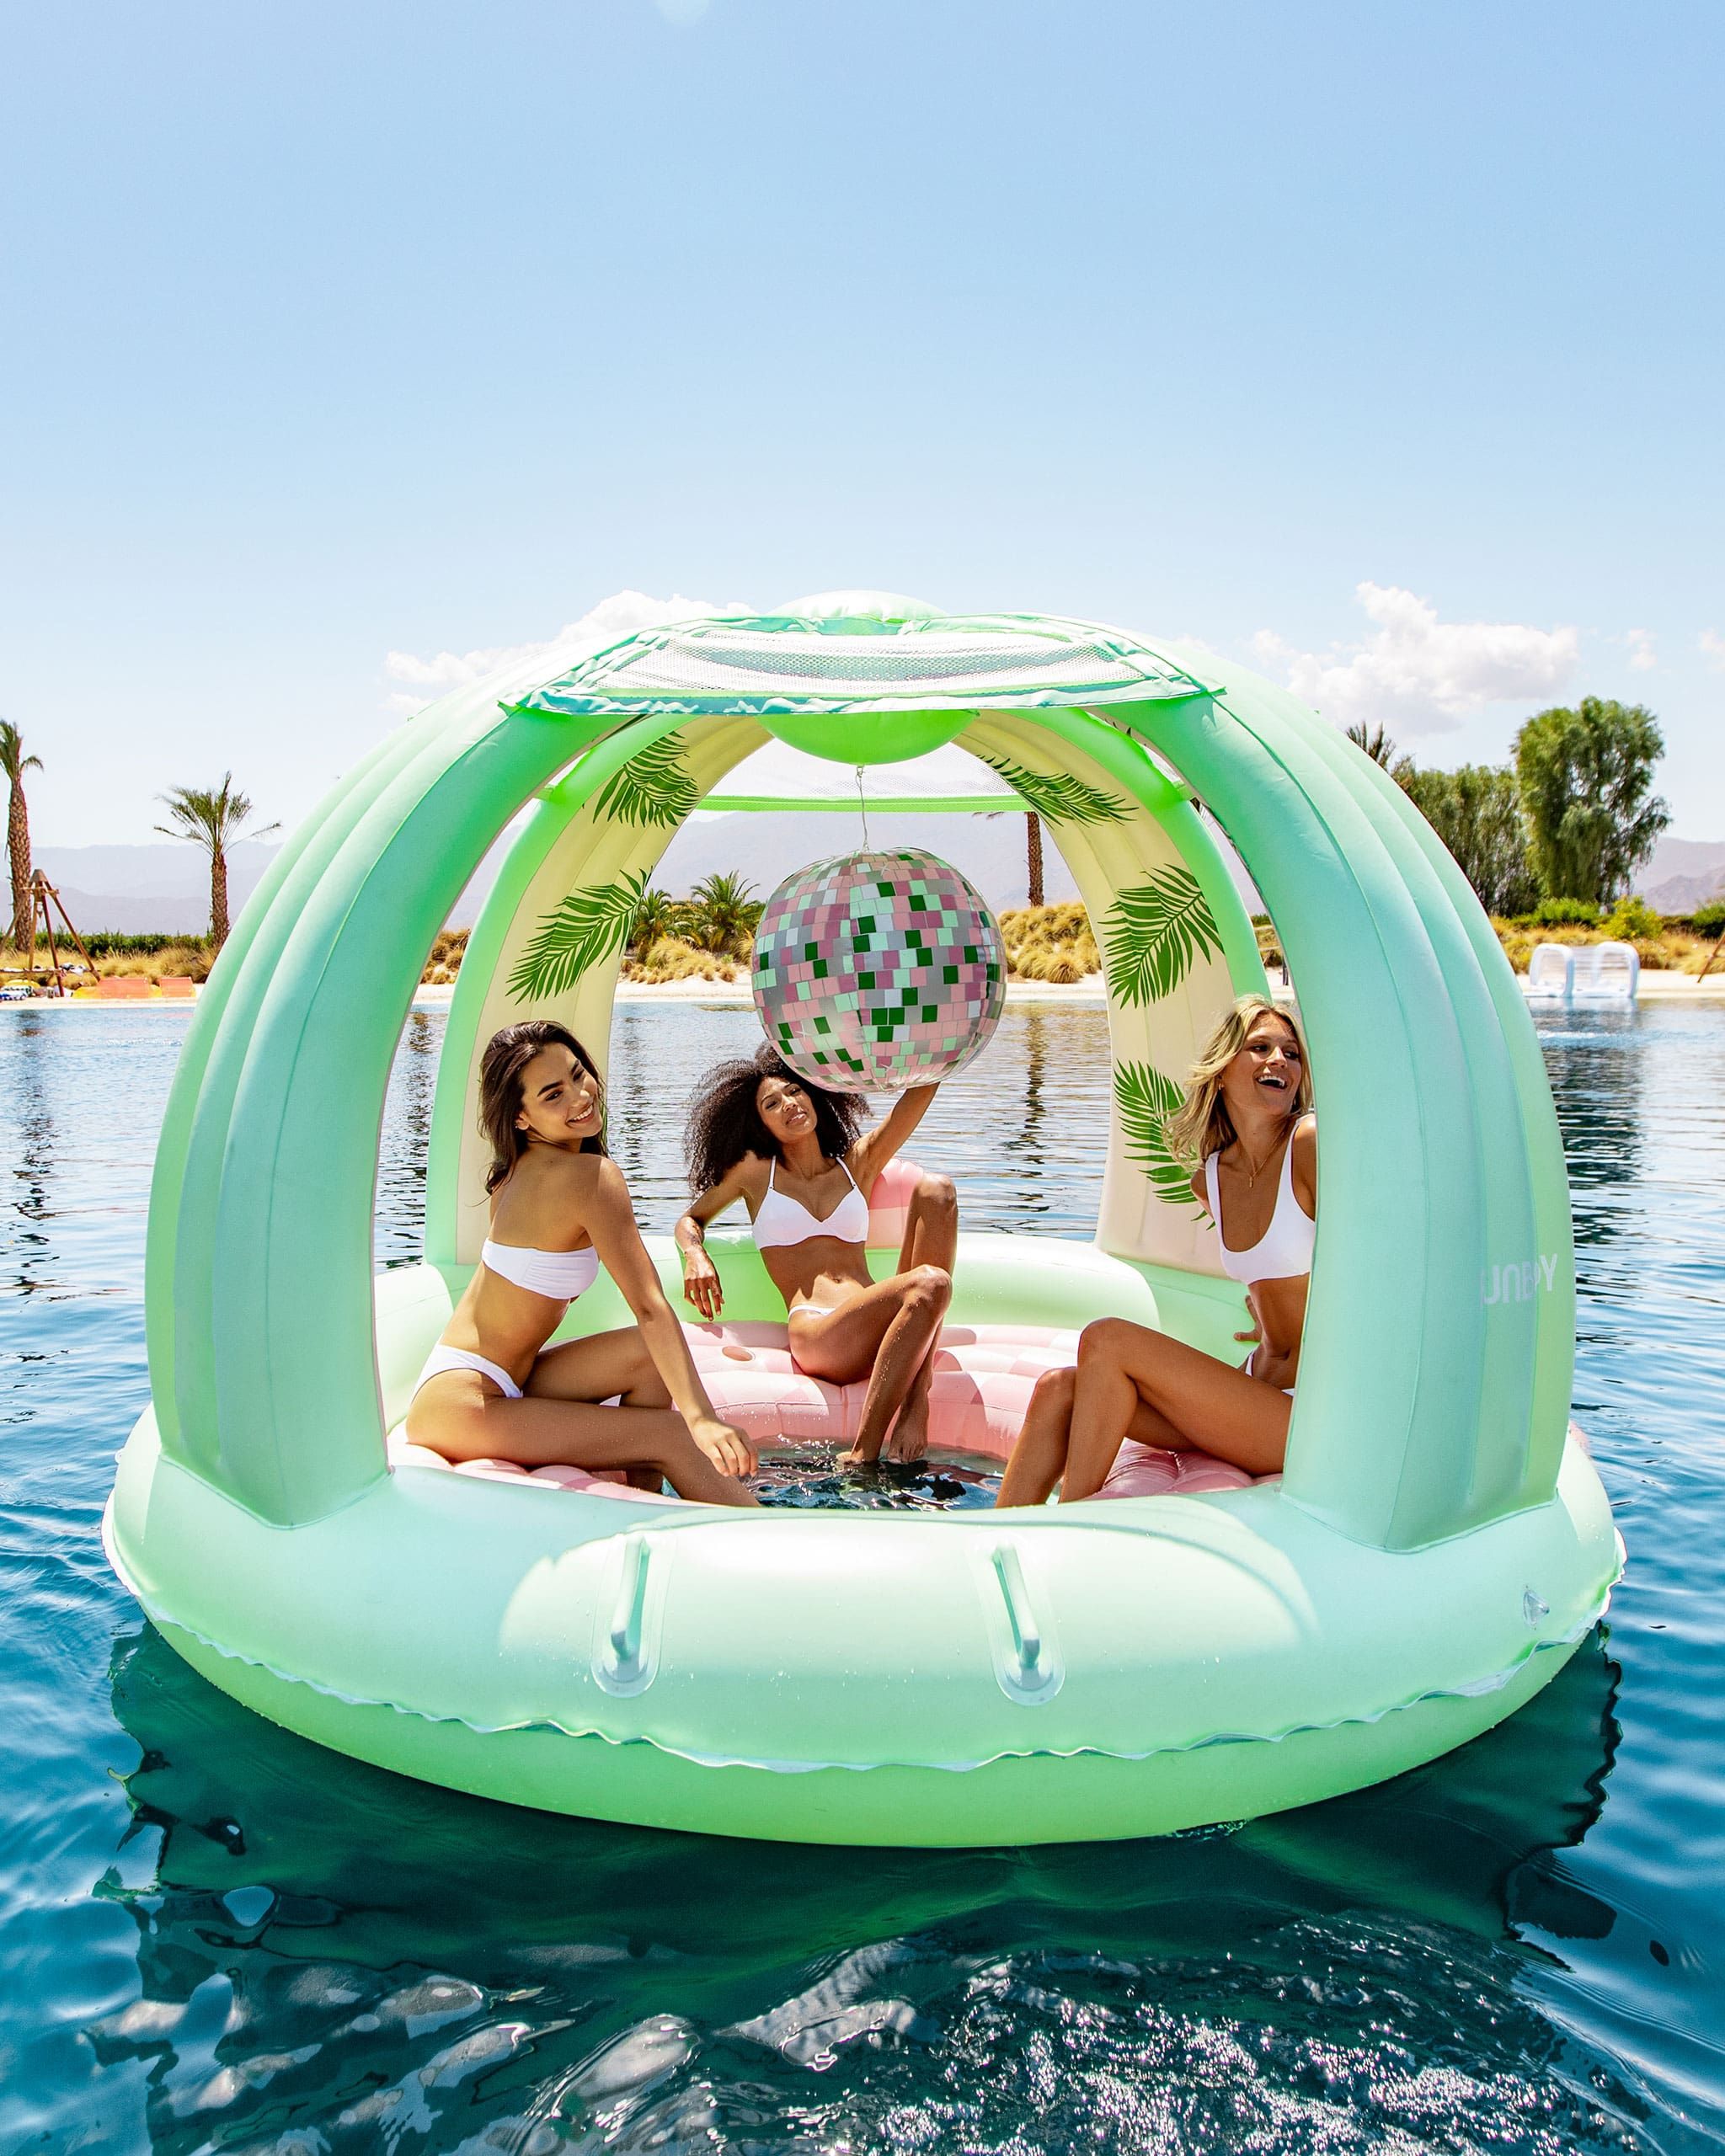 Details about   Pool Float Raft Inflatable Over 5’ Long Gift Coast To Coast Map Sun Squad Swim 